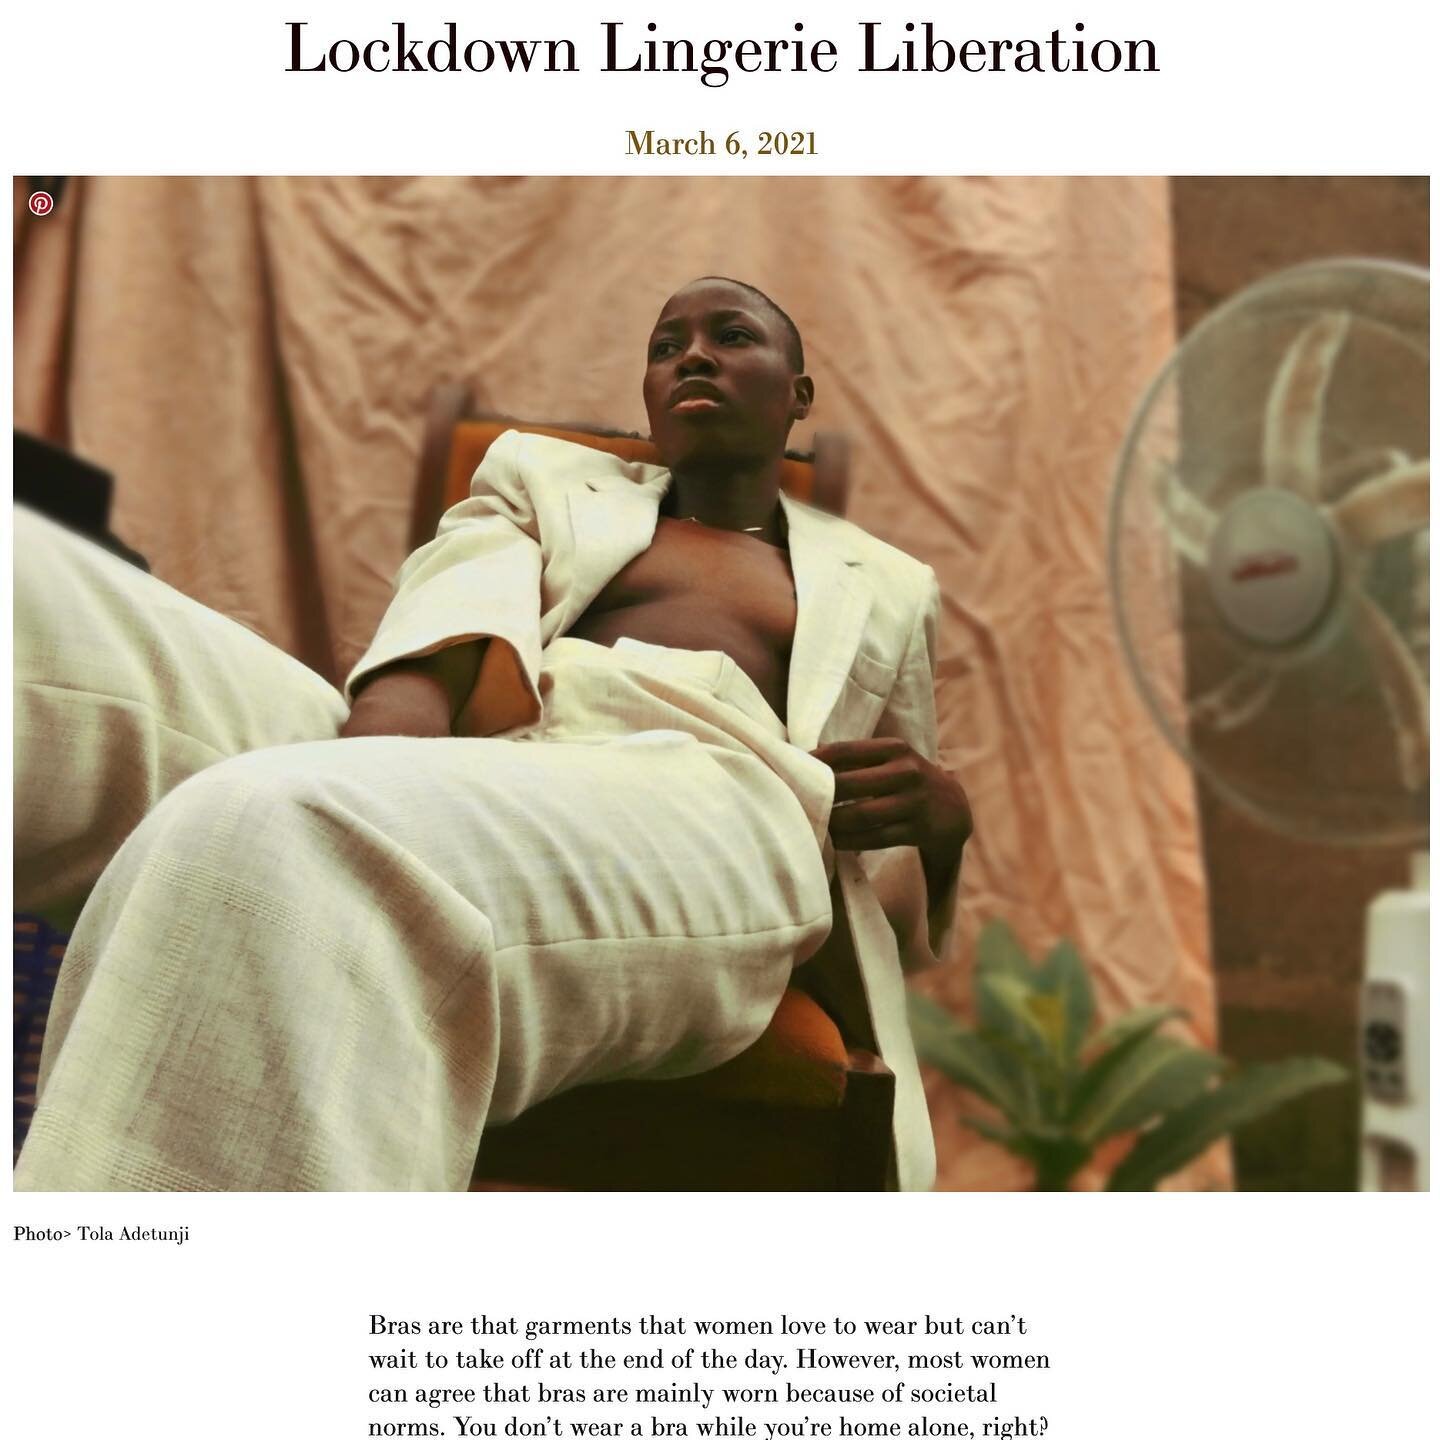 Did you go bra-less during the #Lockdown? 👙
Read our article attached about the Lingerie Liberation: 

Click the link in the bio ⤴️ for the full article ❤️
*
*
*
*
#olyinkamagazine #olyinkalingerie #braliberation #deathofthebra #bra #lingerieliberat